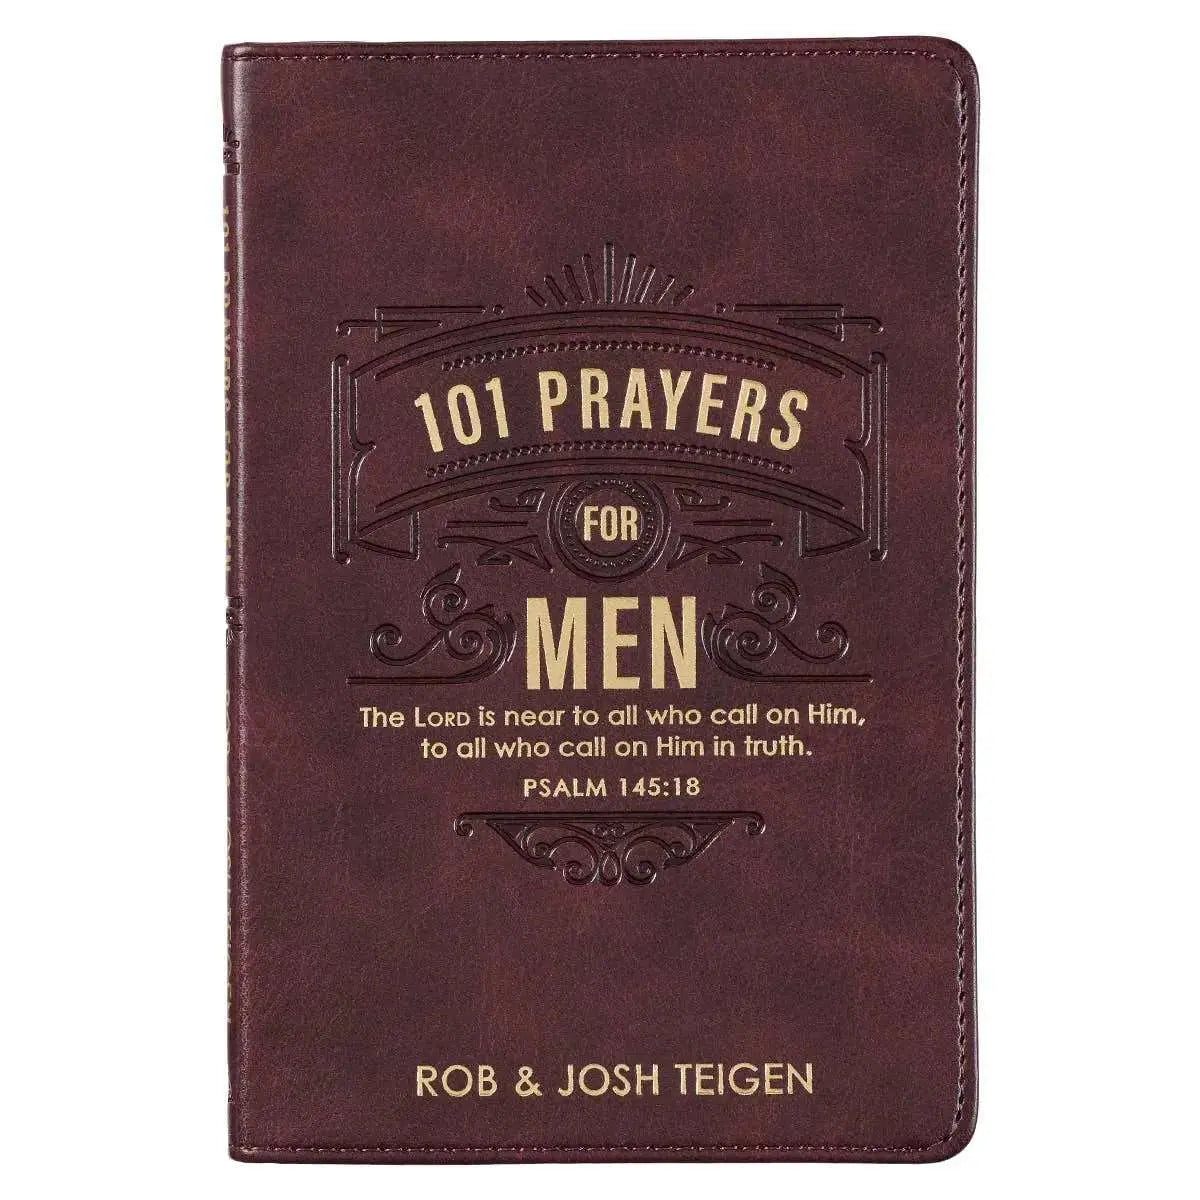 Christian Art Gifts - 101 Prayers for Men Brown Faux Leather Gift Book - Psalm 145:18 - An Initial Impression